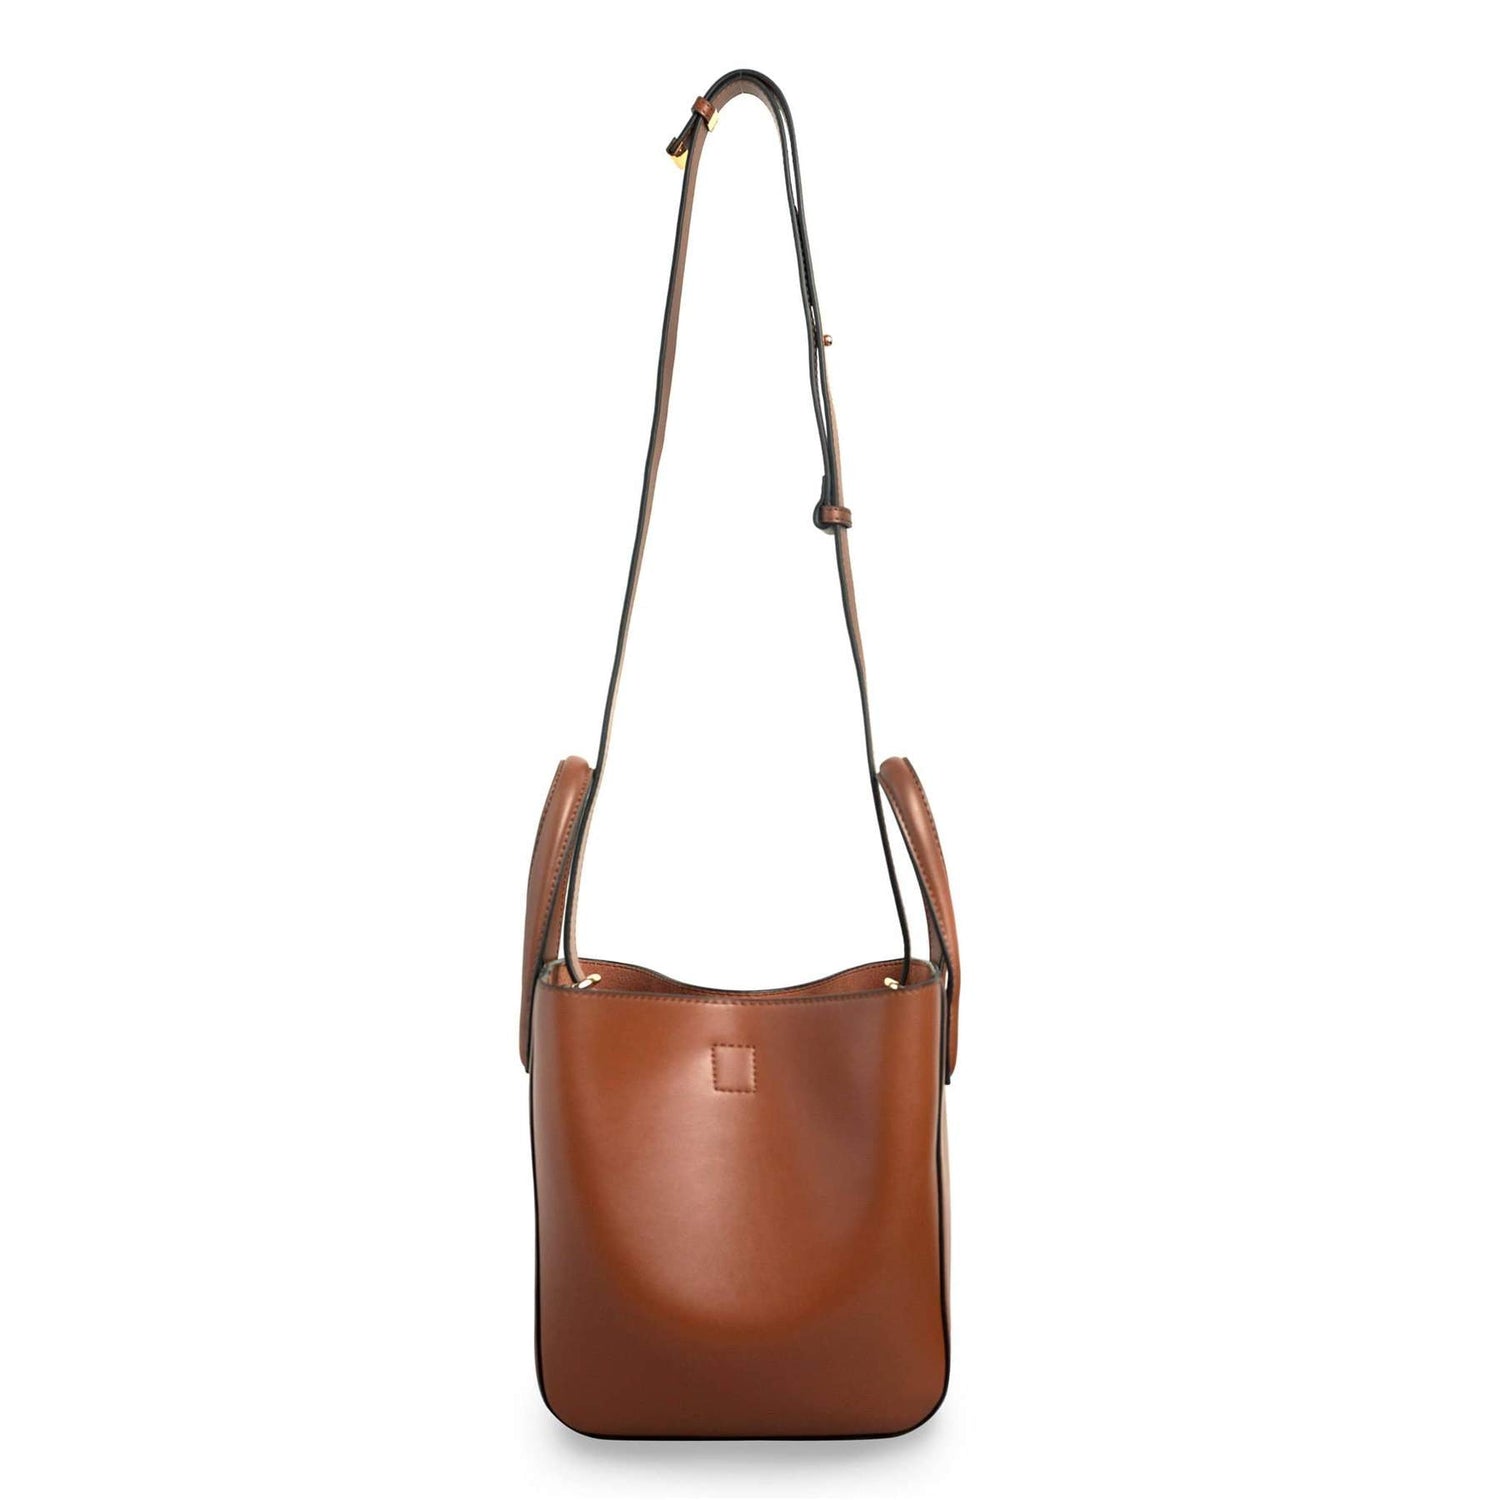 X NIHILO - EIGHT MINI TOTE BUCKET BAG - TAN Side bag with strap extended